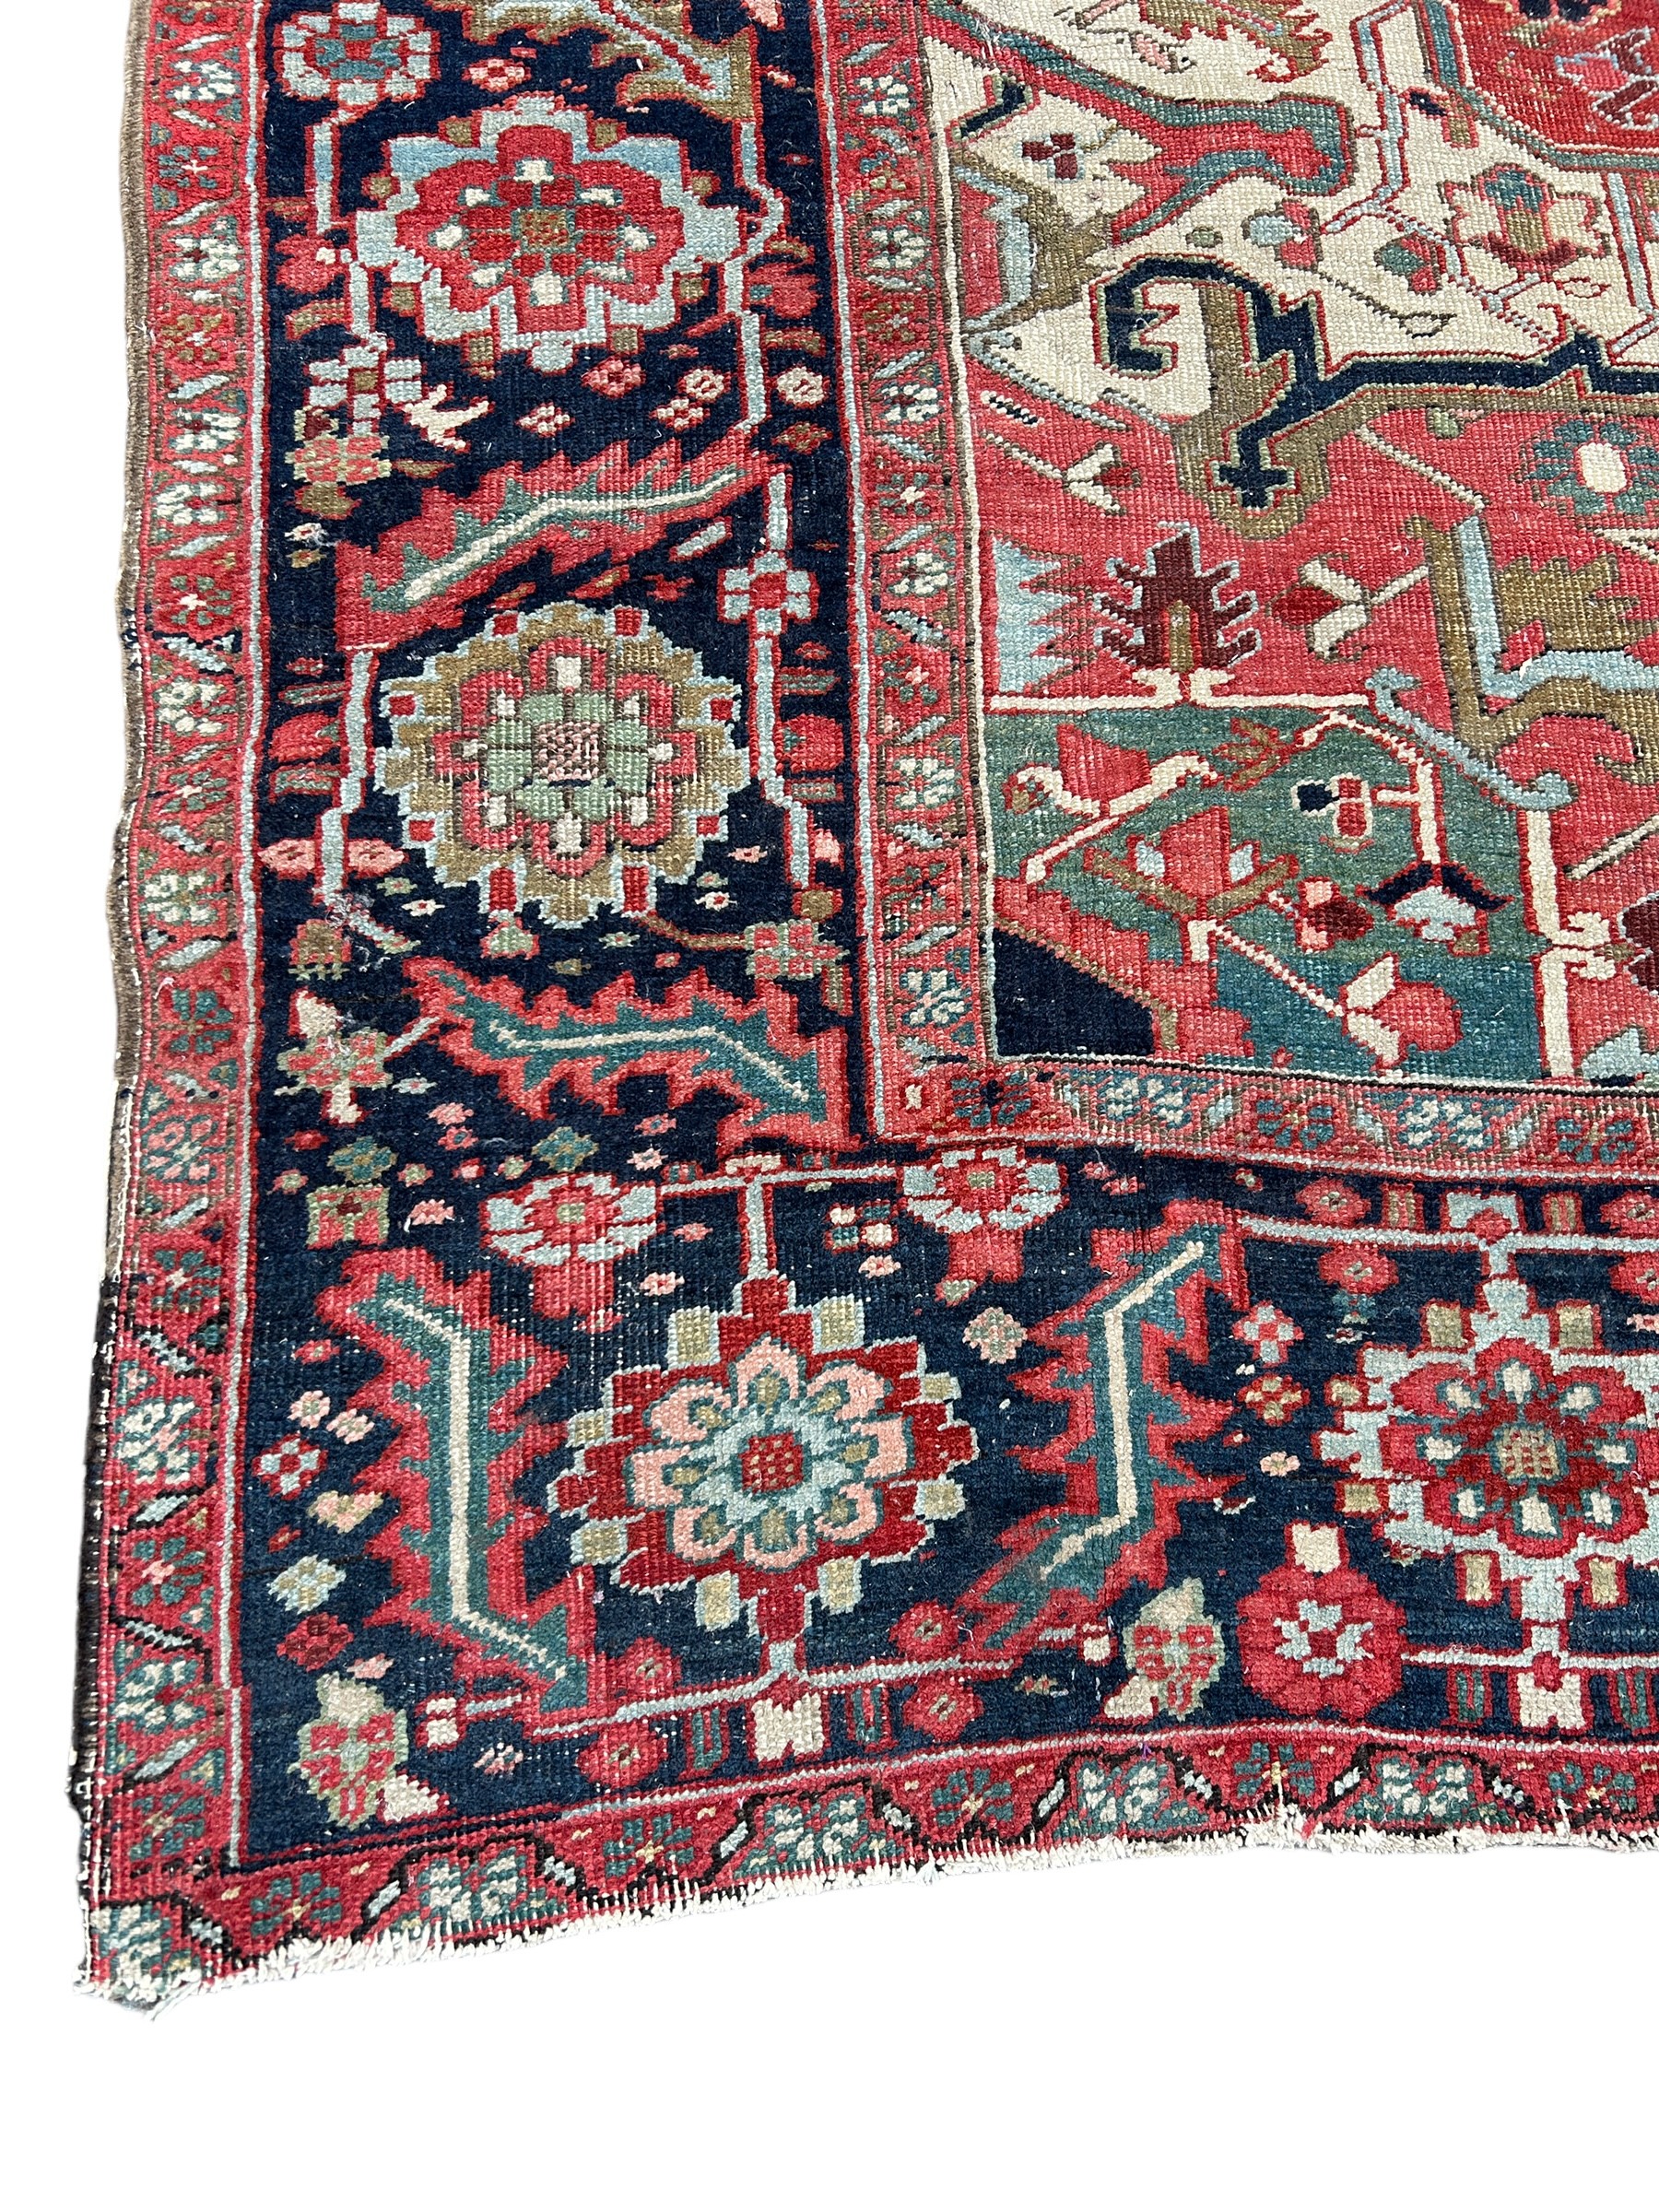 AN ANTIQUE HERIZ RUG REPUTEDLY FROM THE RESIDENCE OF BENITO MUSSOLINI (1883-1945), POSSIBLY VILLA - Image 2 of 5